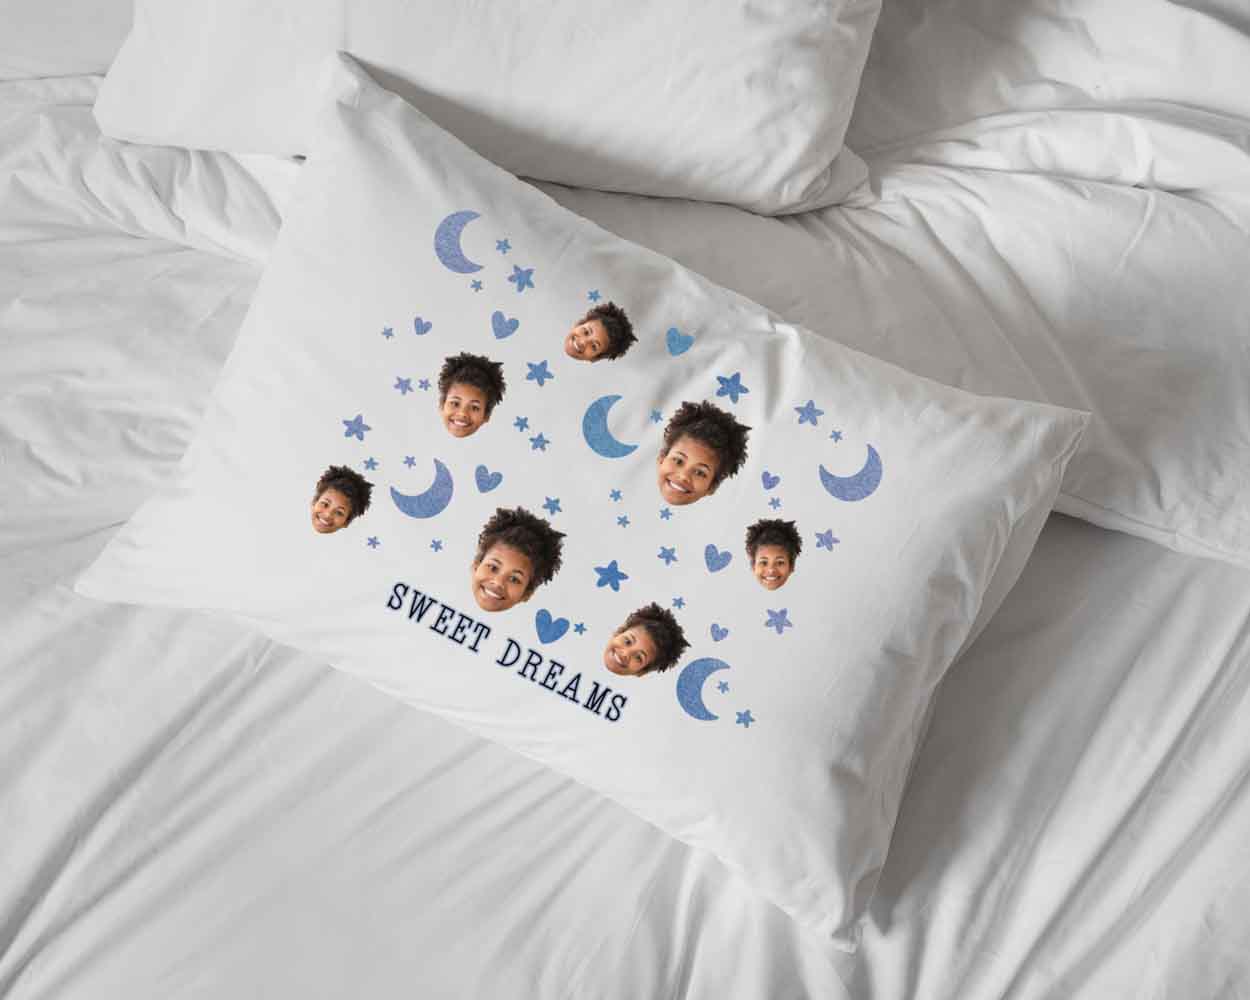 Personalized Custom Printed Pillowcase With Your Photos